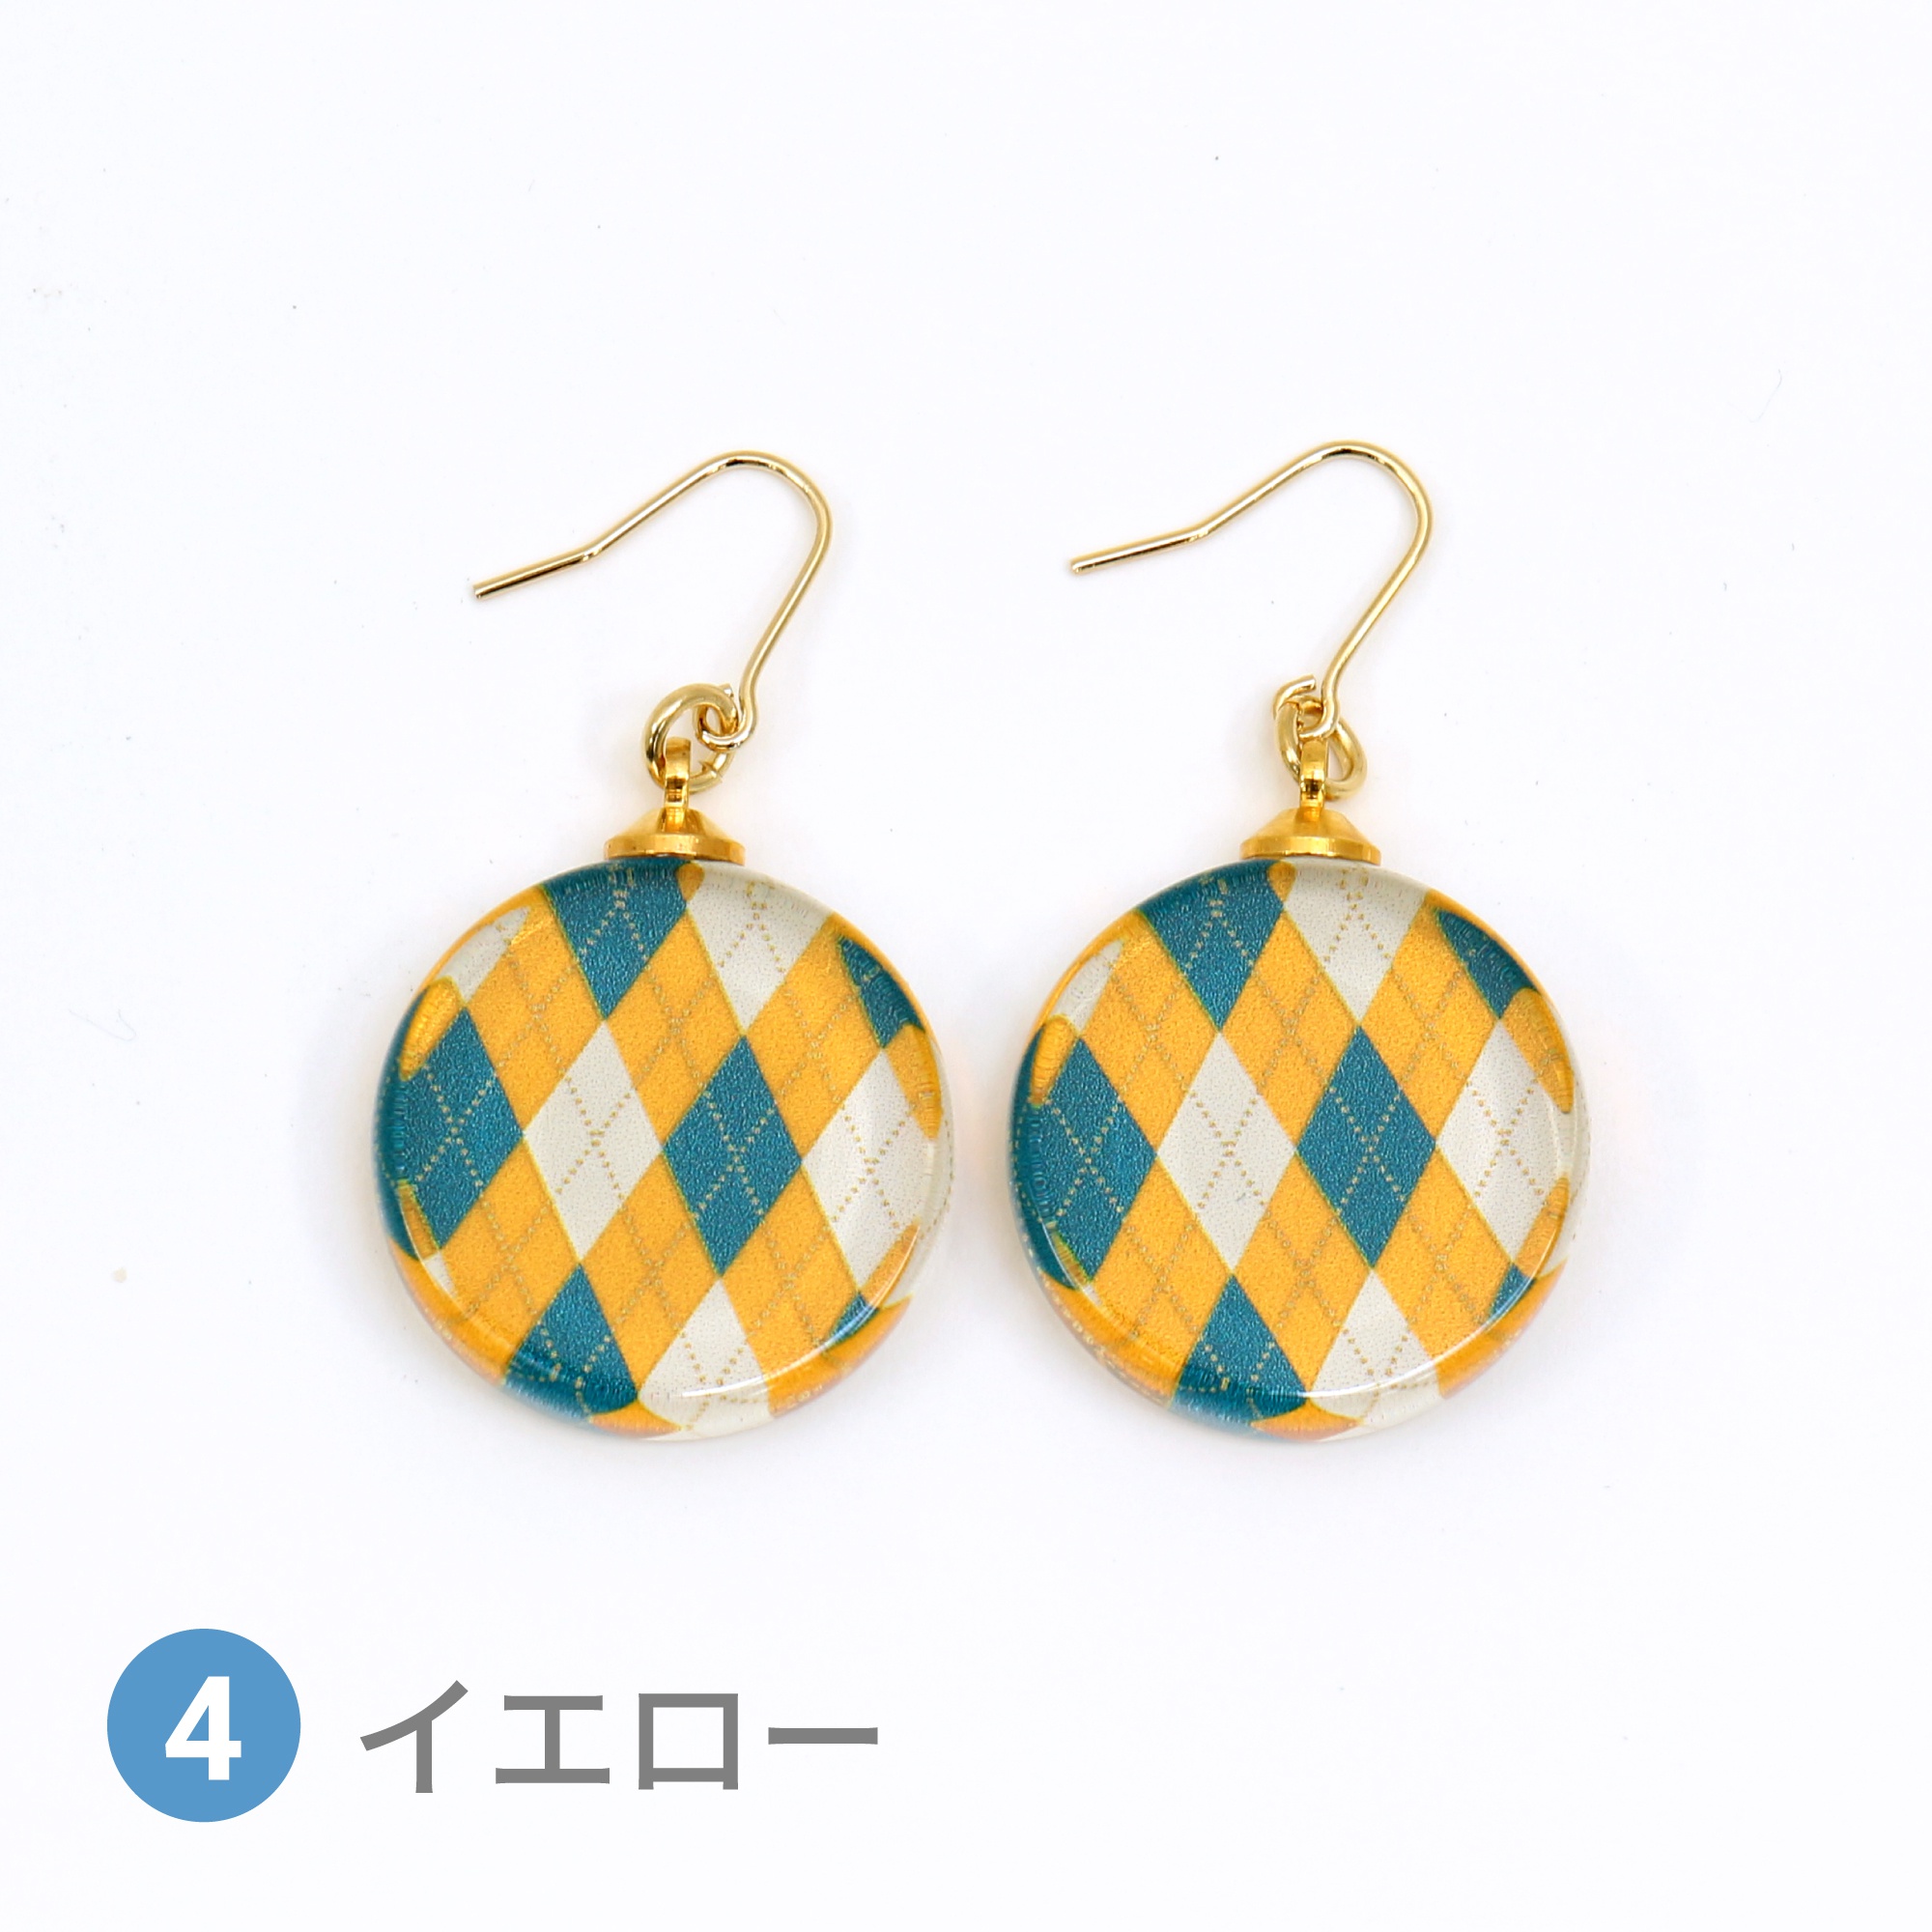 Glass accessories Pierced Earring ARGYLE yellow round shape